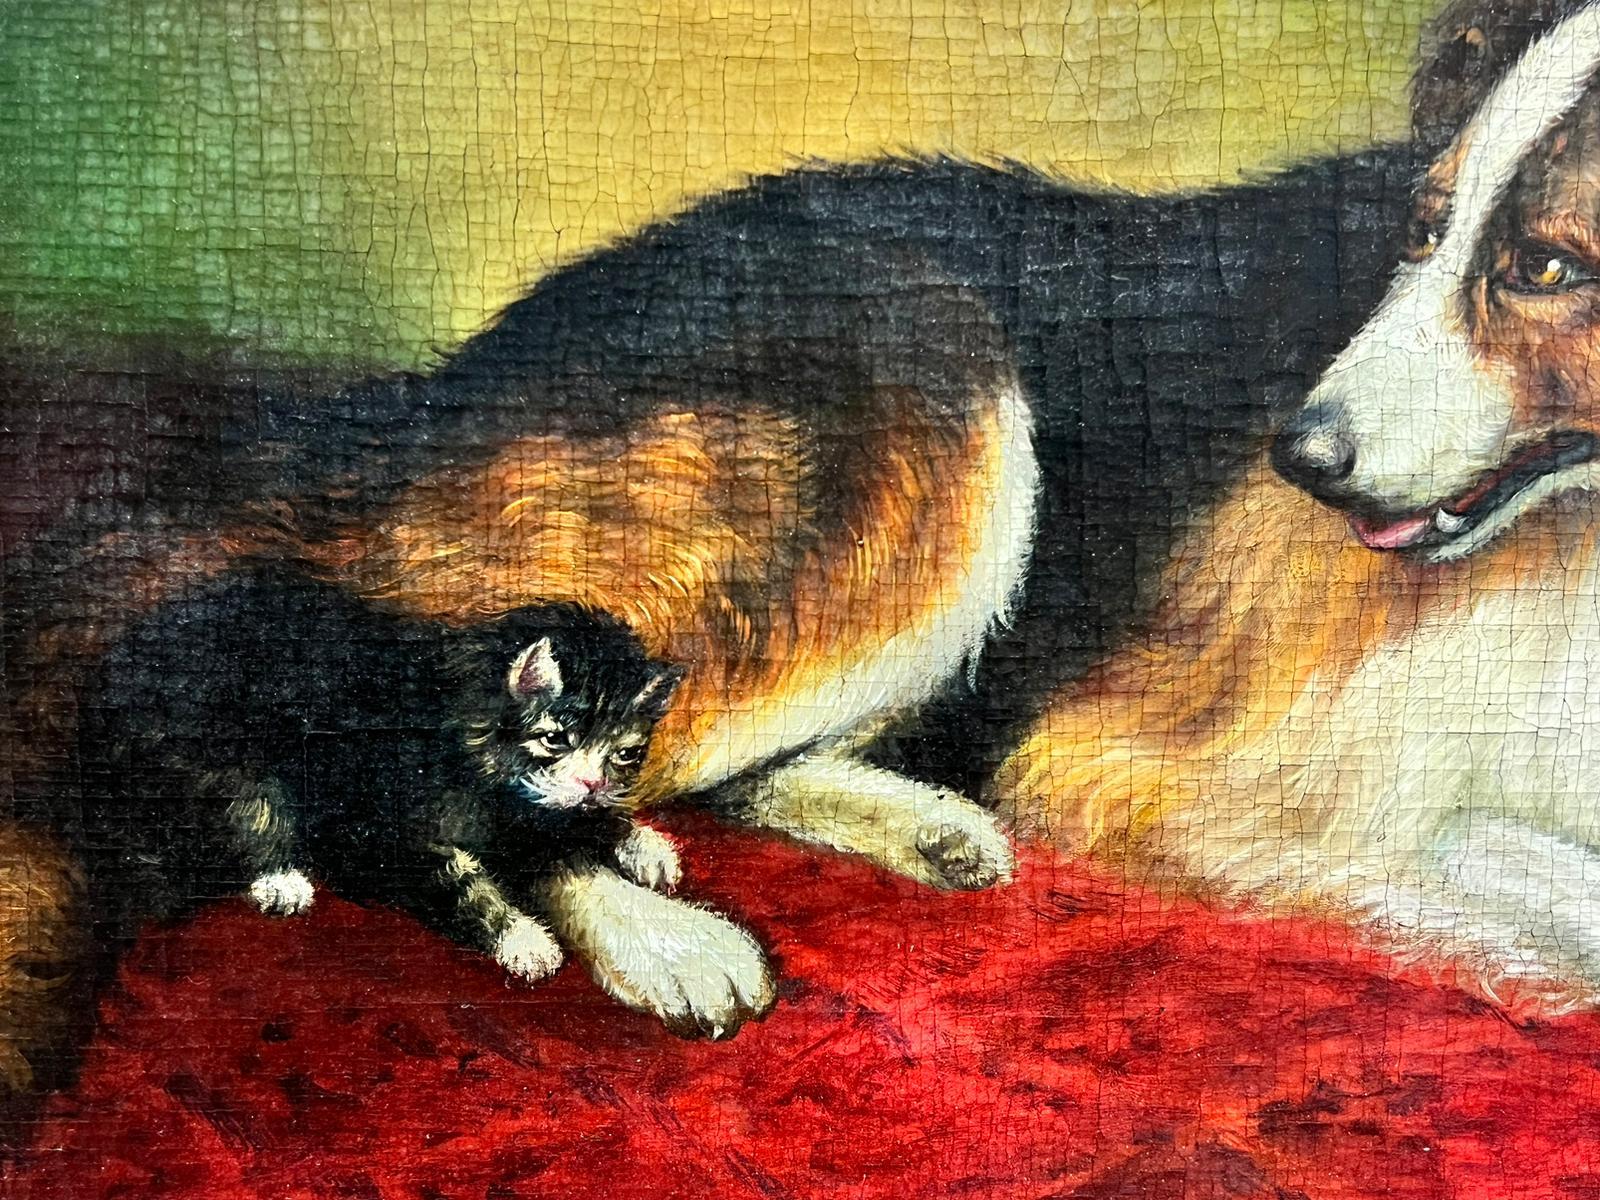 Collie Dog with Kittens
English artist, 19th century 
oil on canvas, framed
framed: 22 x 30 inches
canvas: 16.5 x 23.5 inches
Provenance: private collection, England 
Condition: The painting is in overall very good and sound condition
 